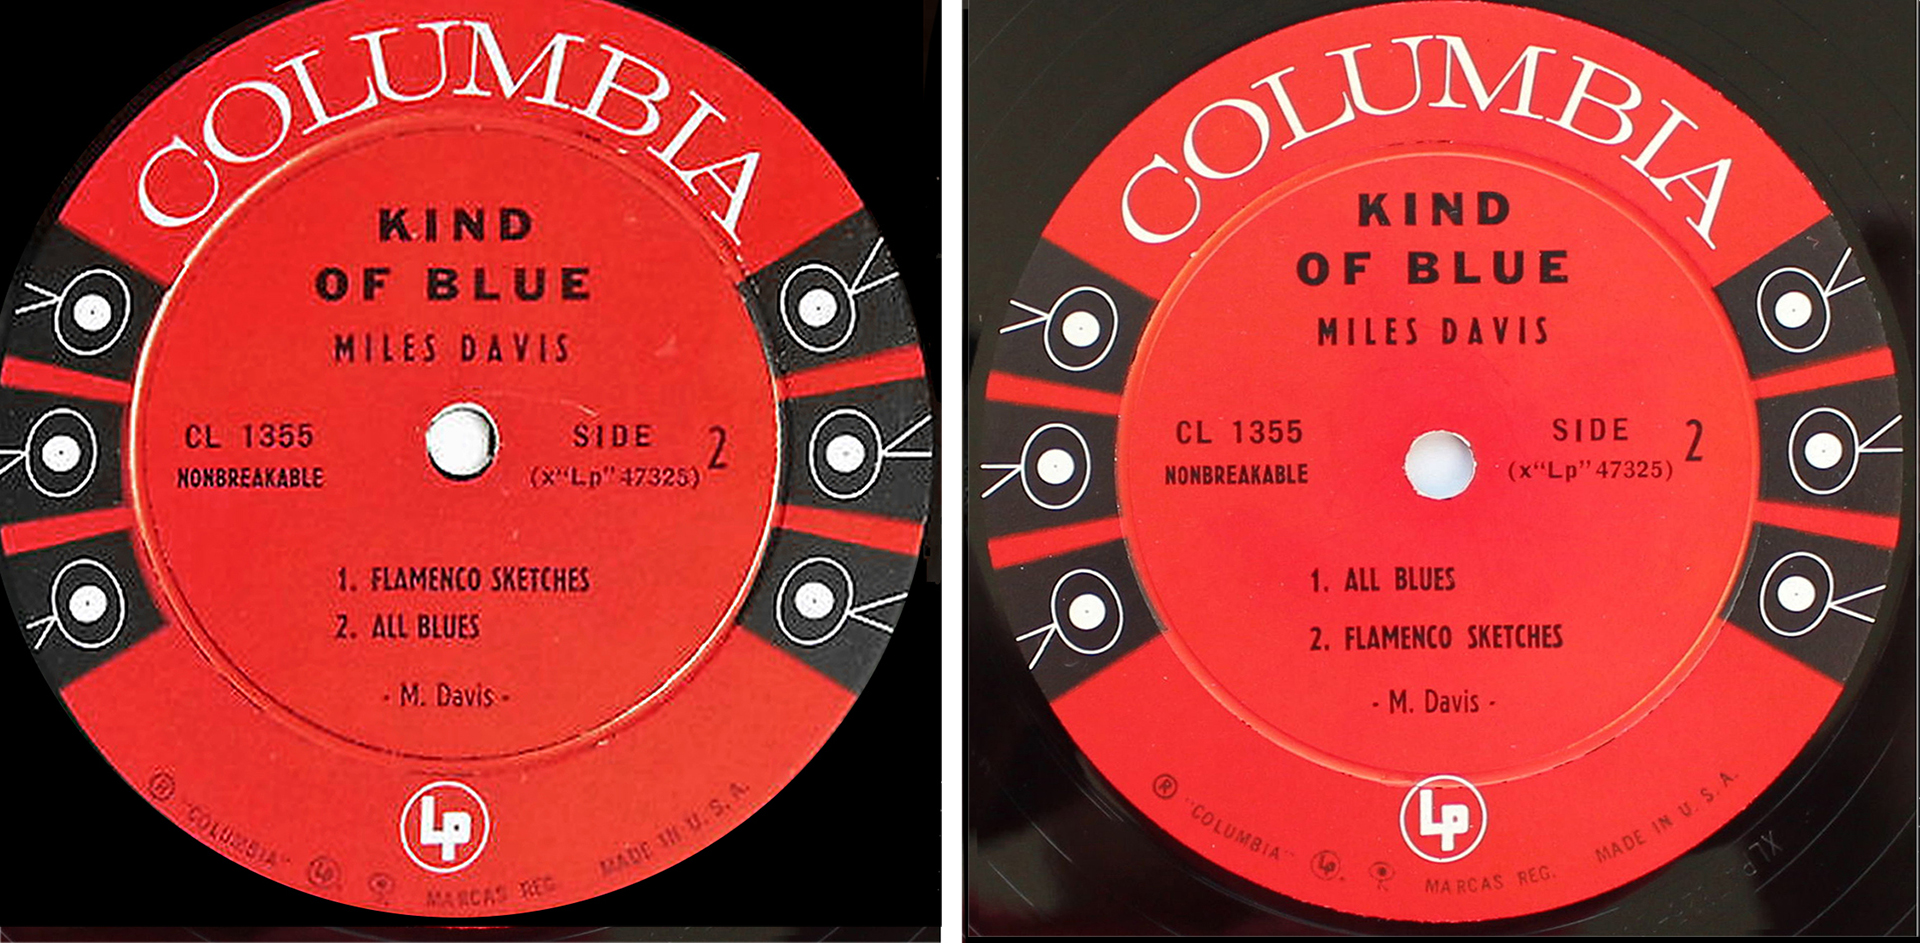 Utallige Profit Afhængig Search for the earliest pressings of “Kind of Blue”, a Collector's Guide  (more updates Nov 13) | LondonJazzCollector